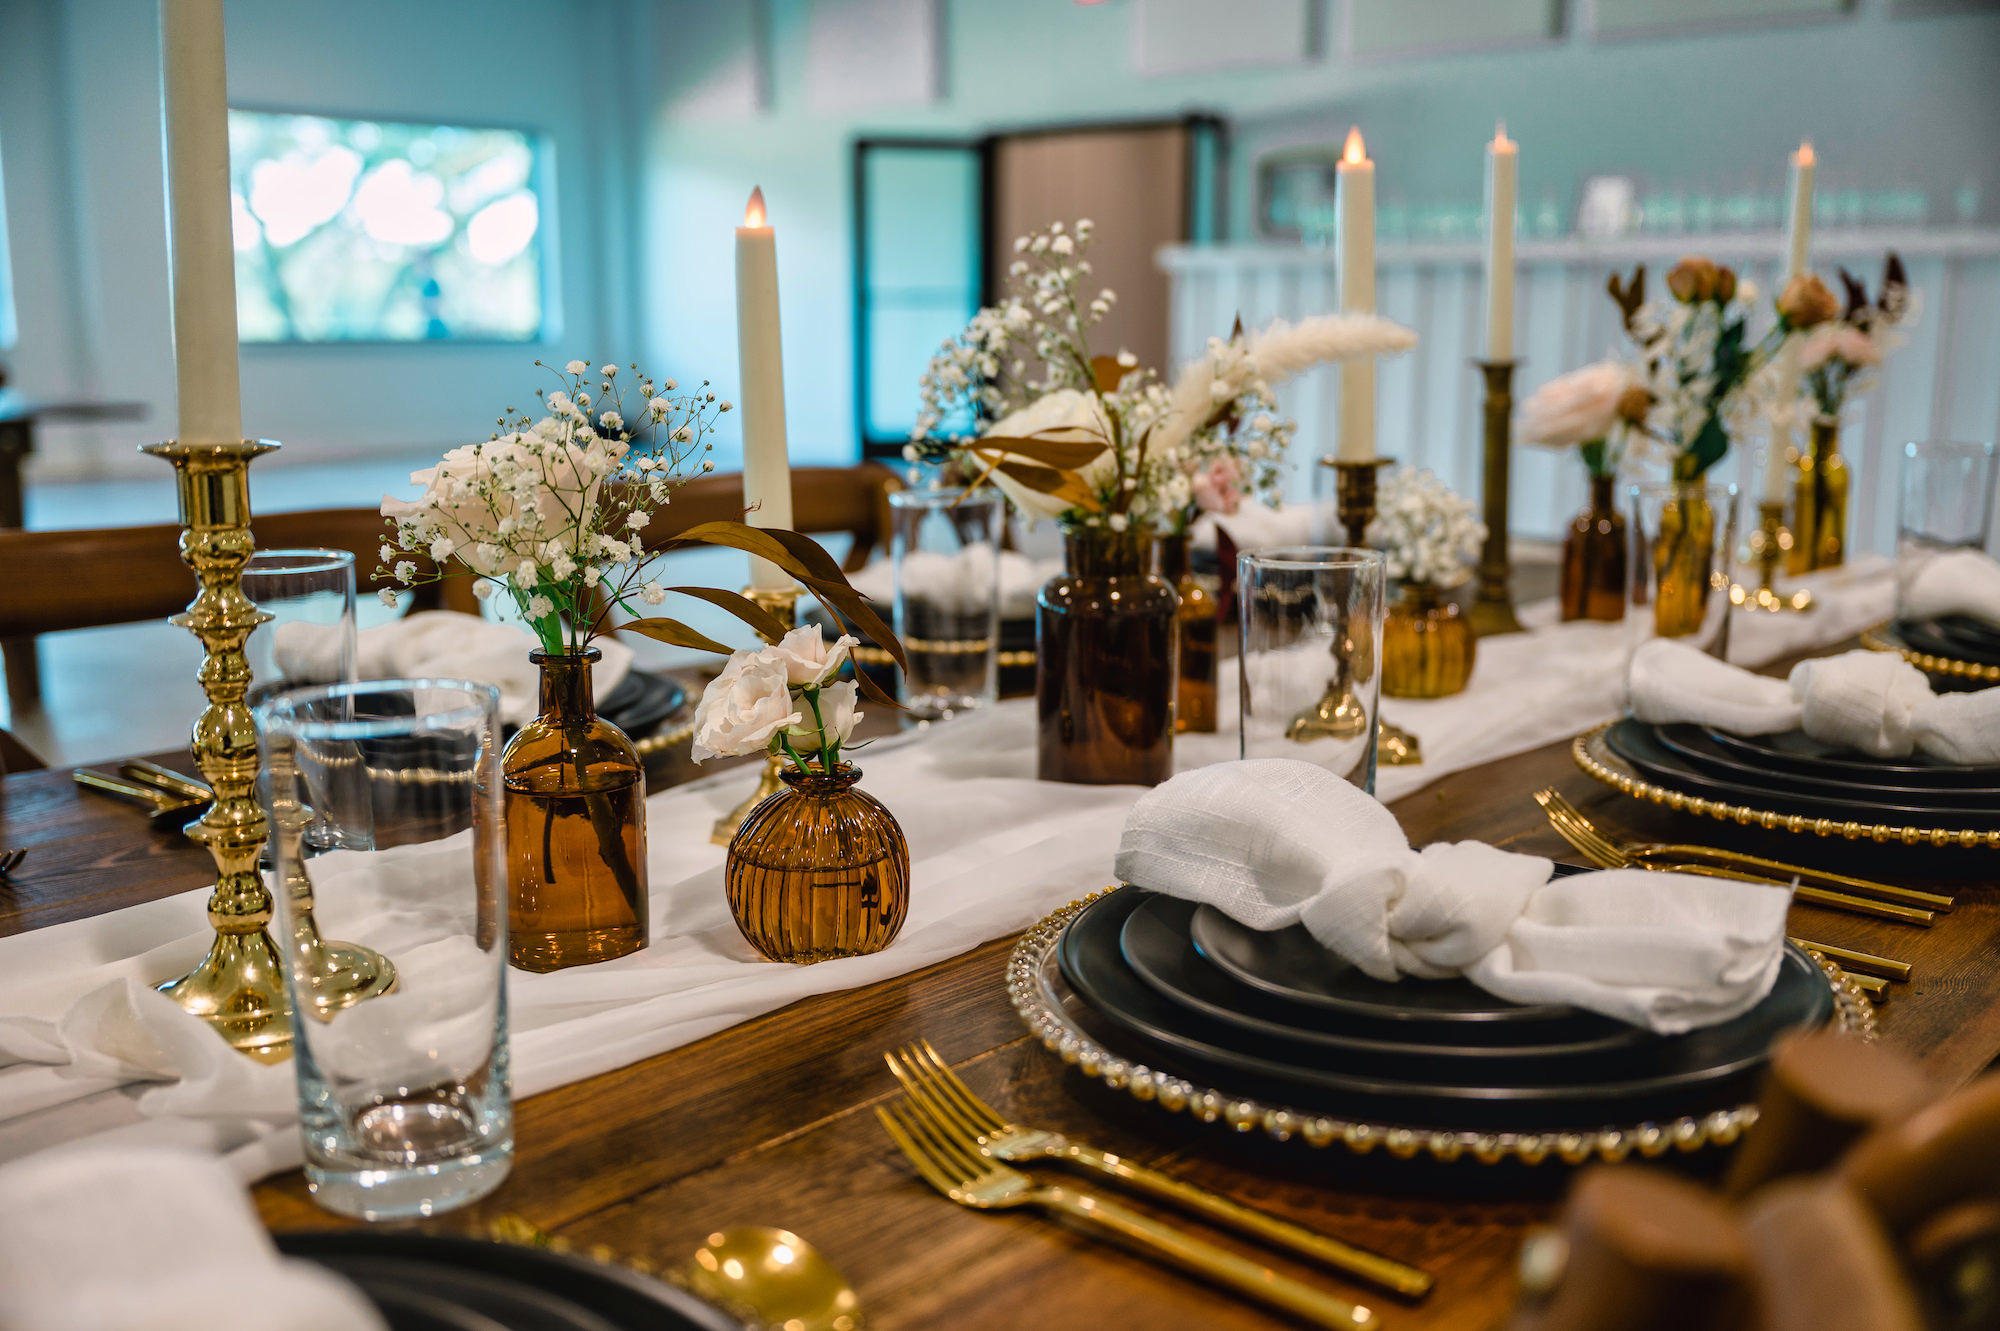 Amber Flower Vases with White Roses and Baby's Breath Wedding Reception Table Centerpiece Inspiration | Flameless White Taper Candle with Gold Holders | Black Plates with Gold Beaded Chargers and Flatware Ideas | Dade City Photographer Iyrus Weddings